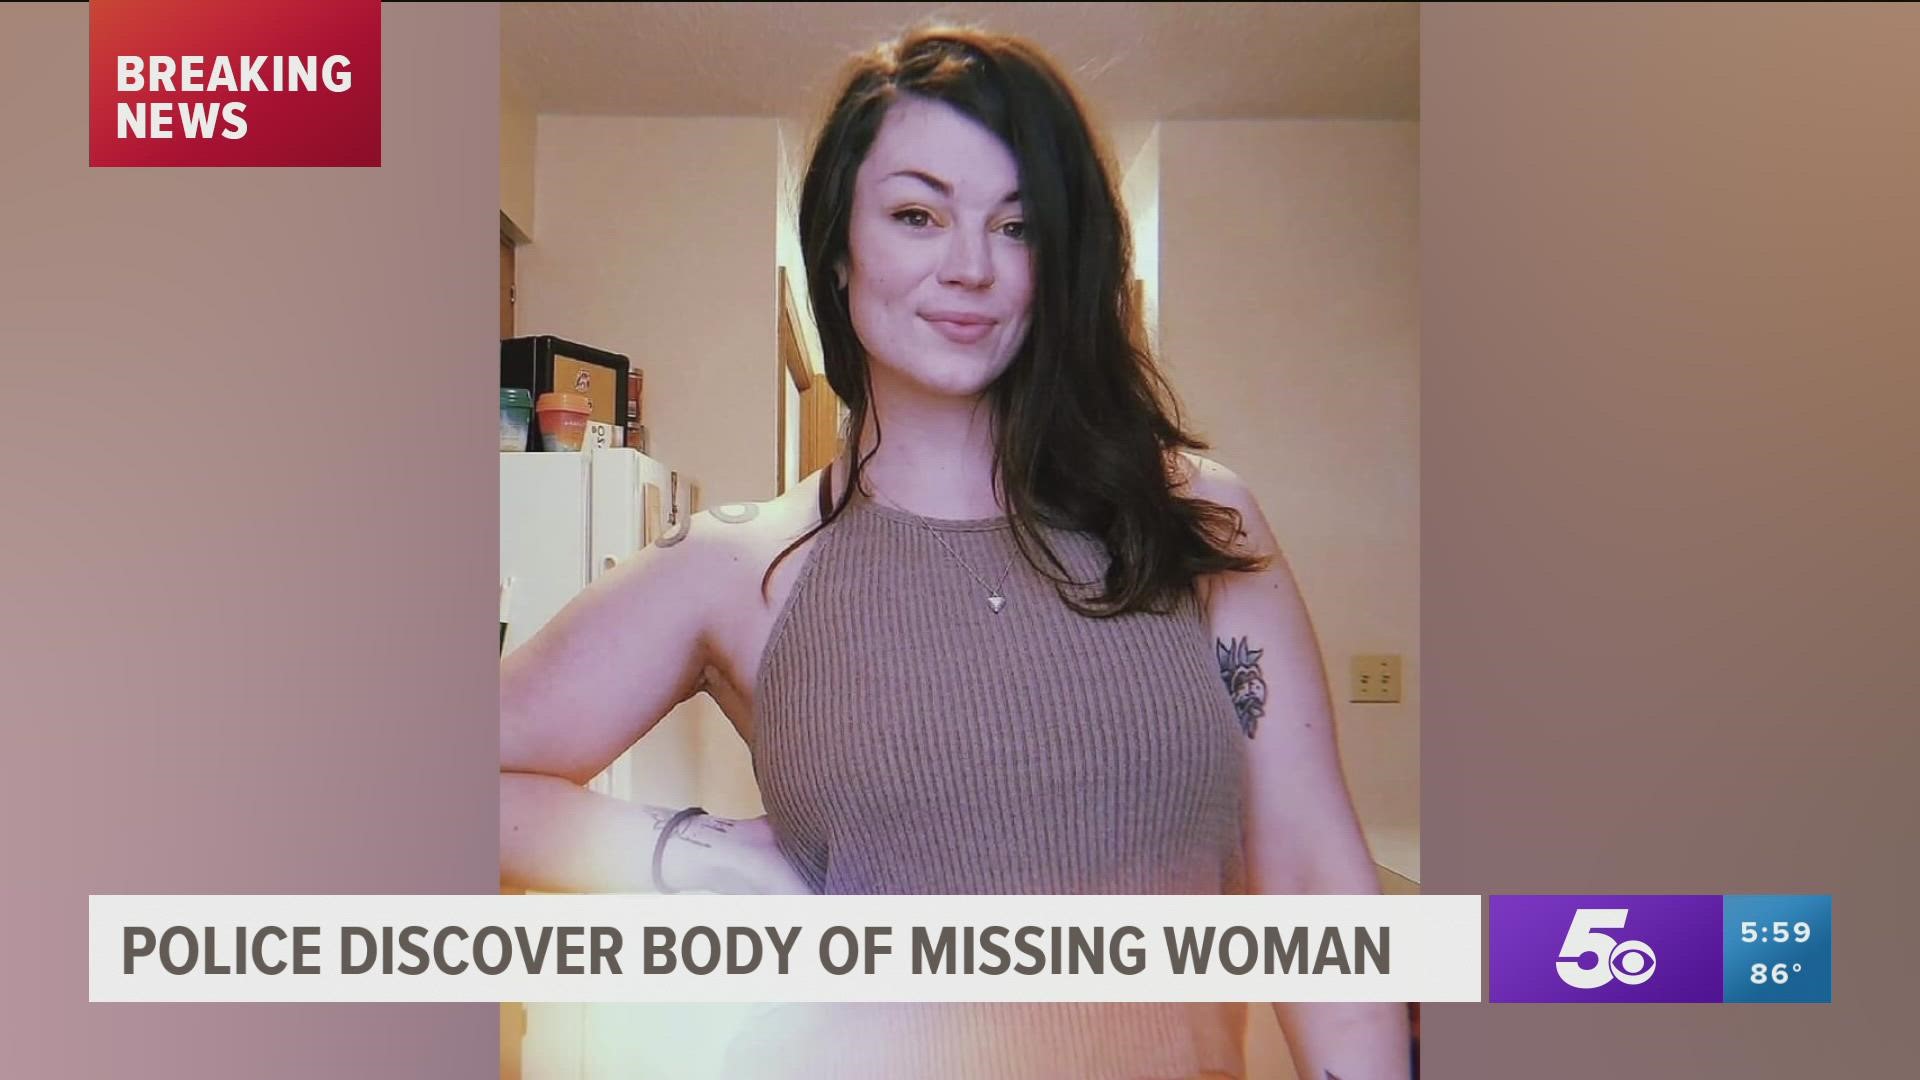 28-year-old Shelby Ratliff went missing during the early morning hours of May 5.